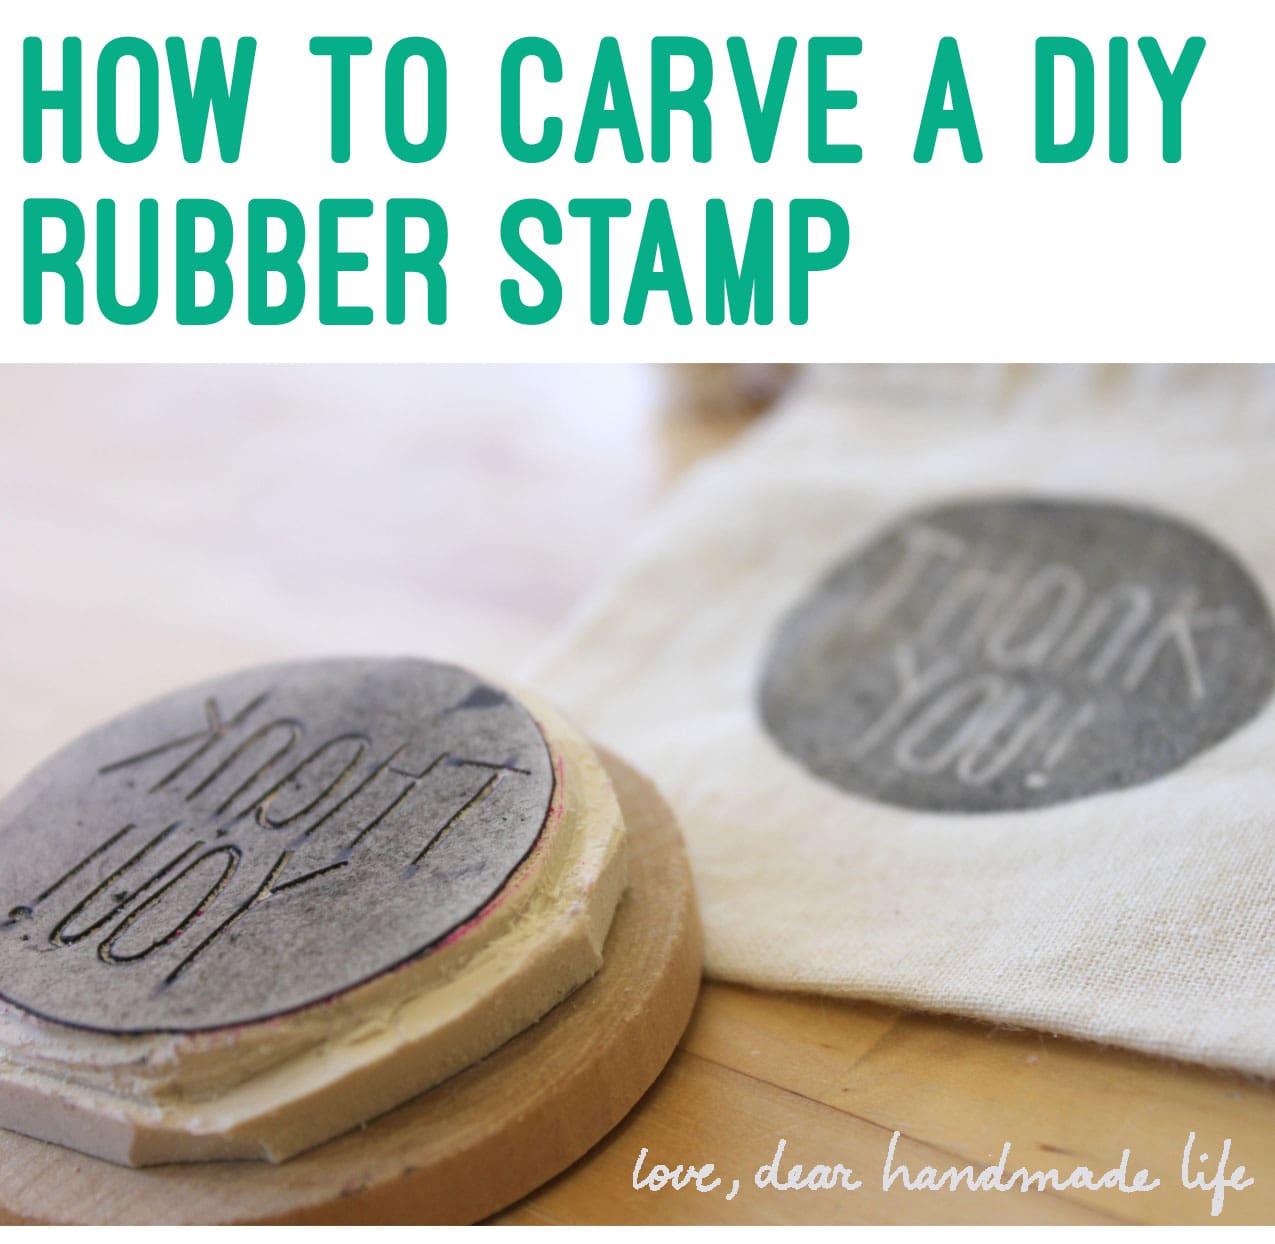 DIY Name Stamps for Kids: A Step-by-Step Guide to Make Homemade Name Stamps